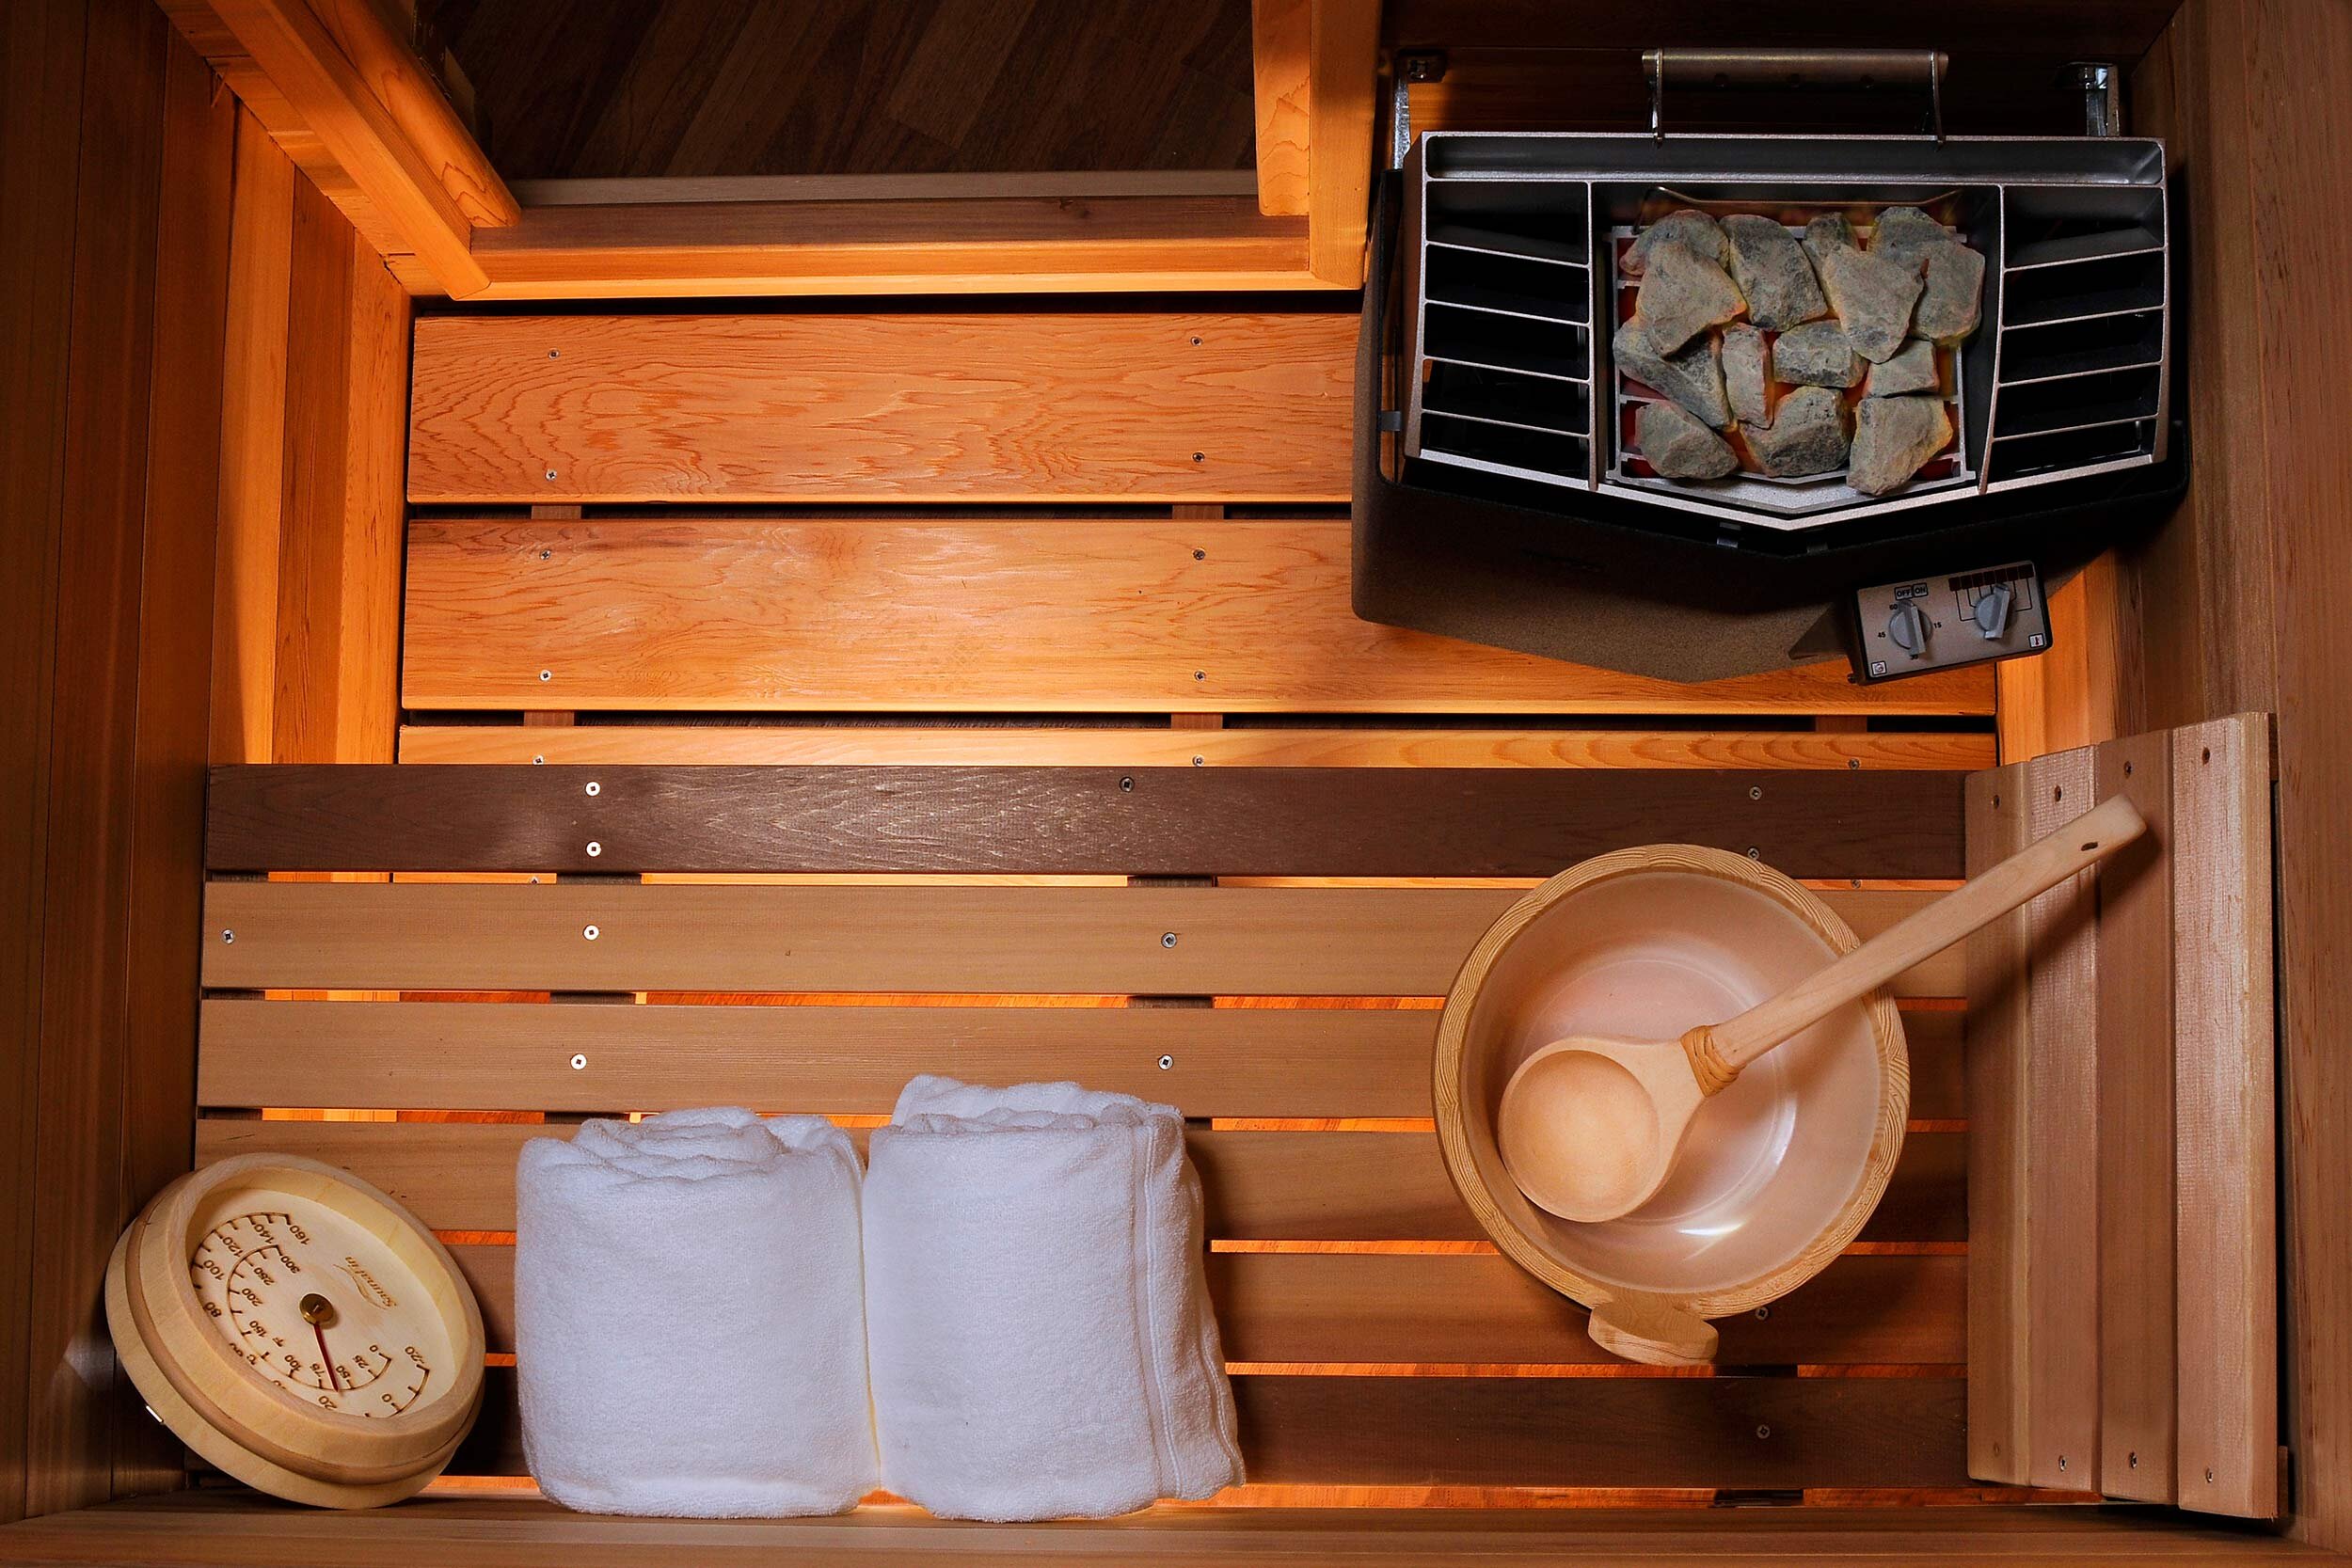 commercial-photography-sauna-interior-product-advertising-photographer-paul-george.jpg